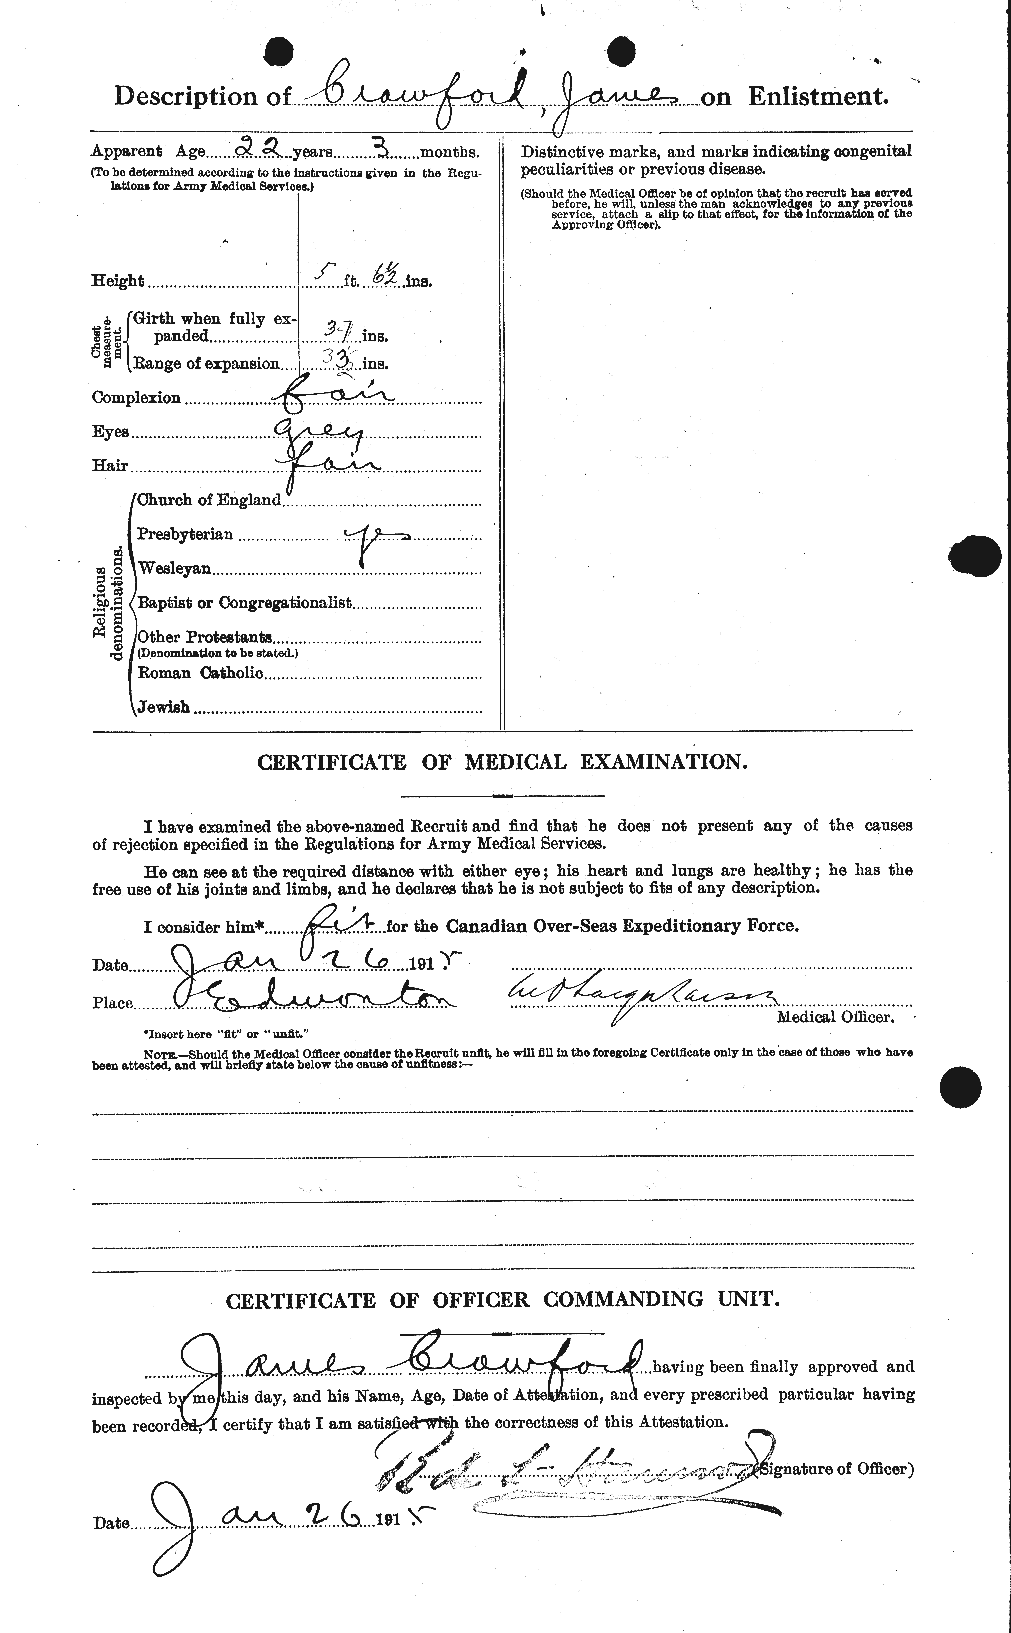 Personnel Records of the First World War - CEF 062766b